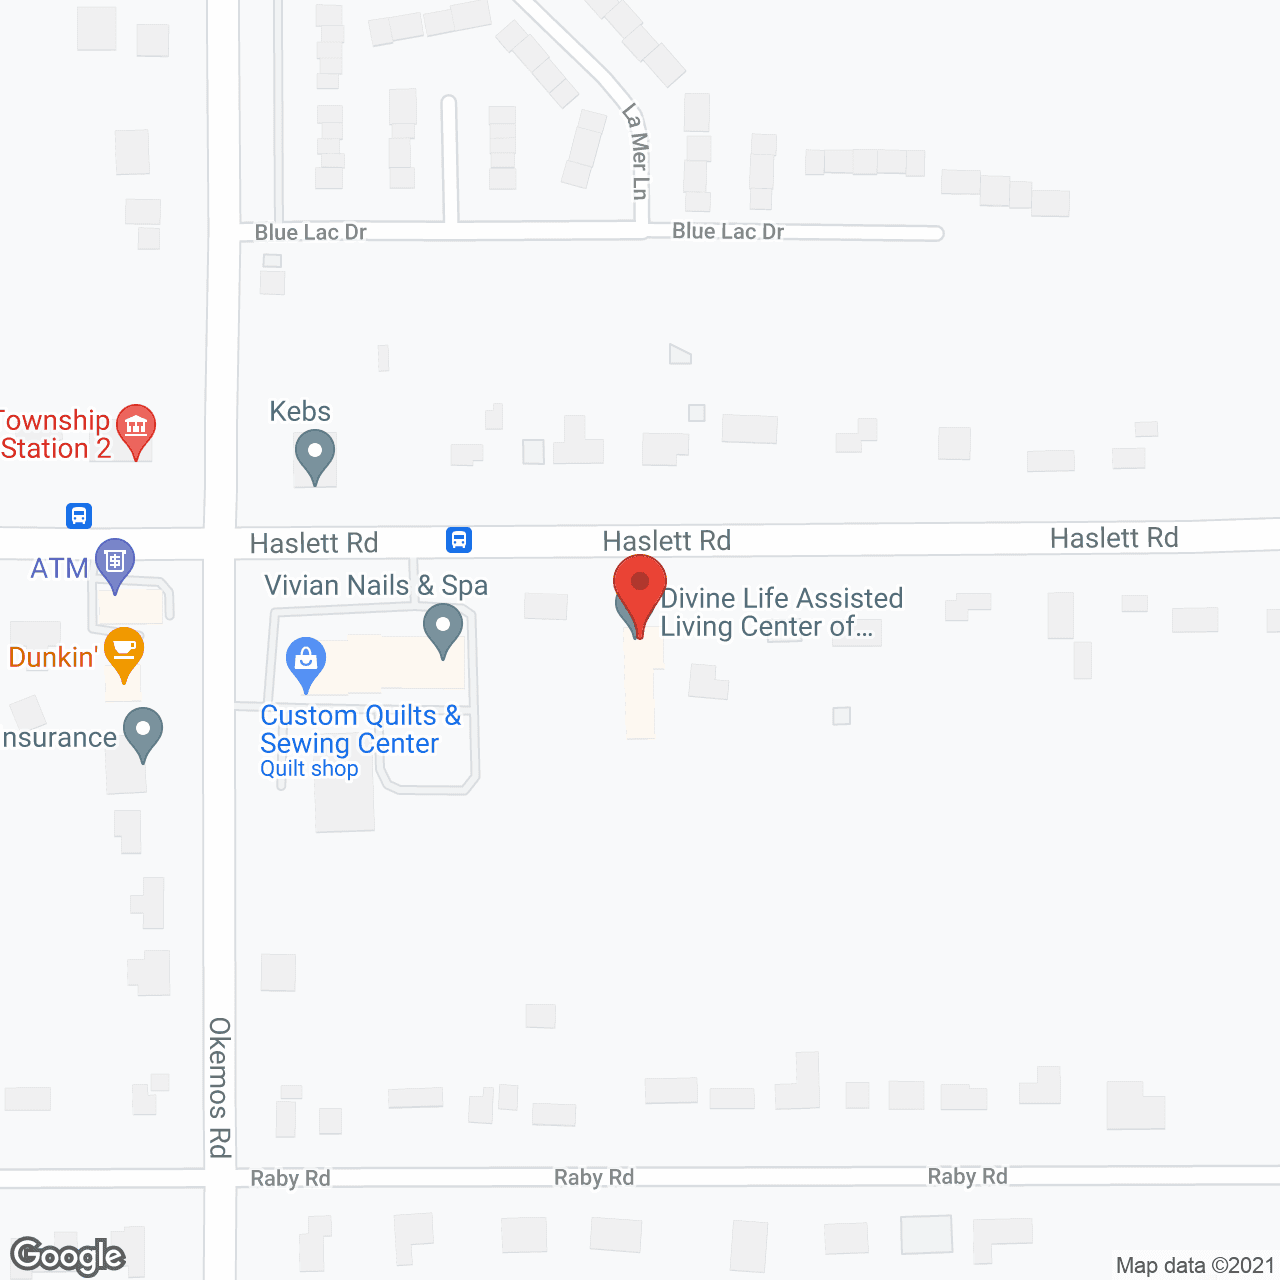 Divine Life Assisted Living Center #3 in google map